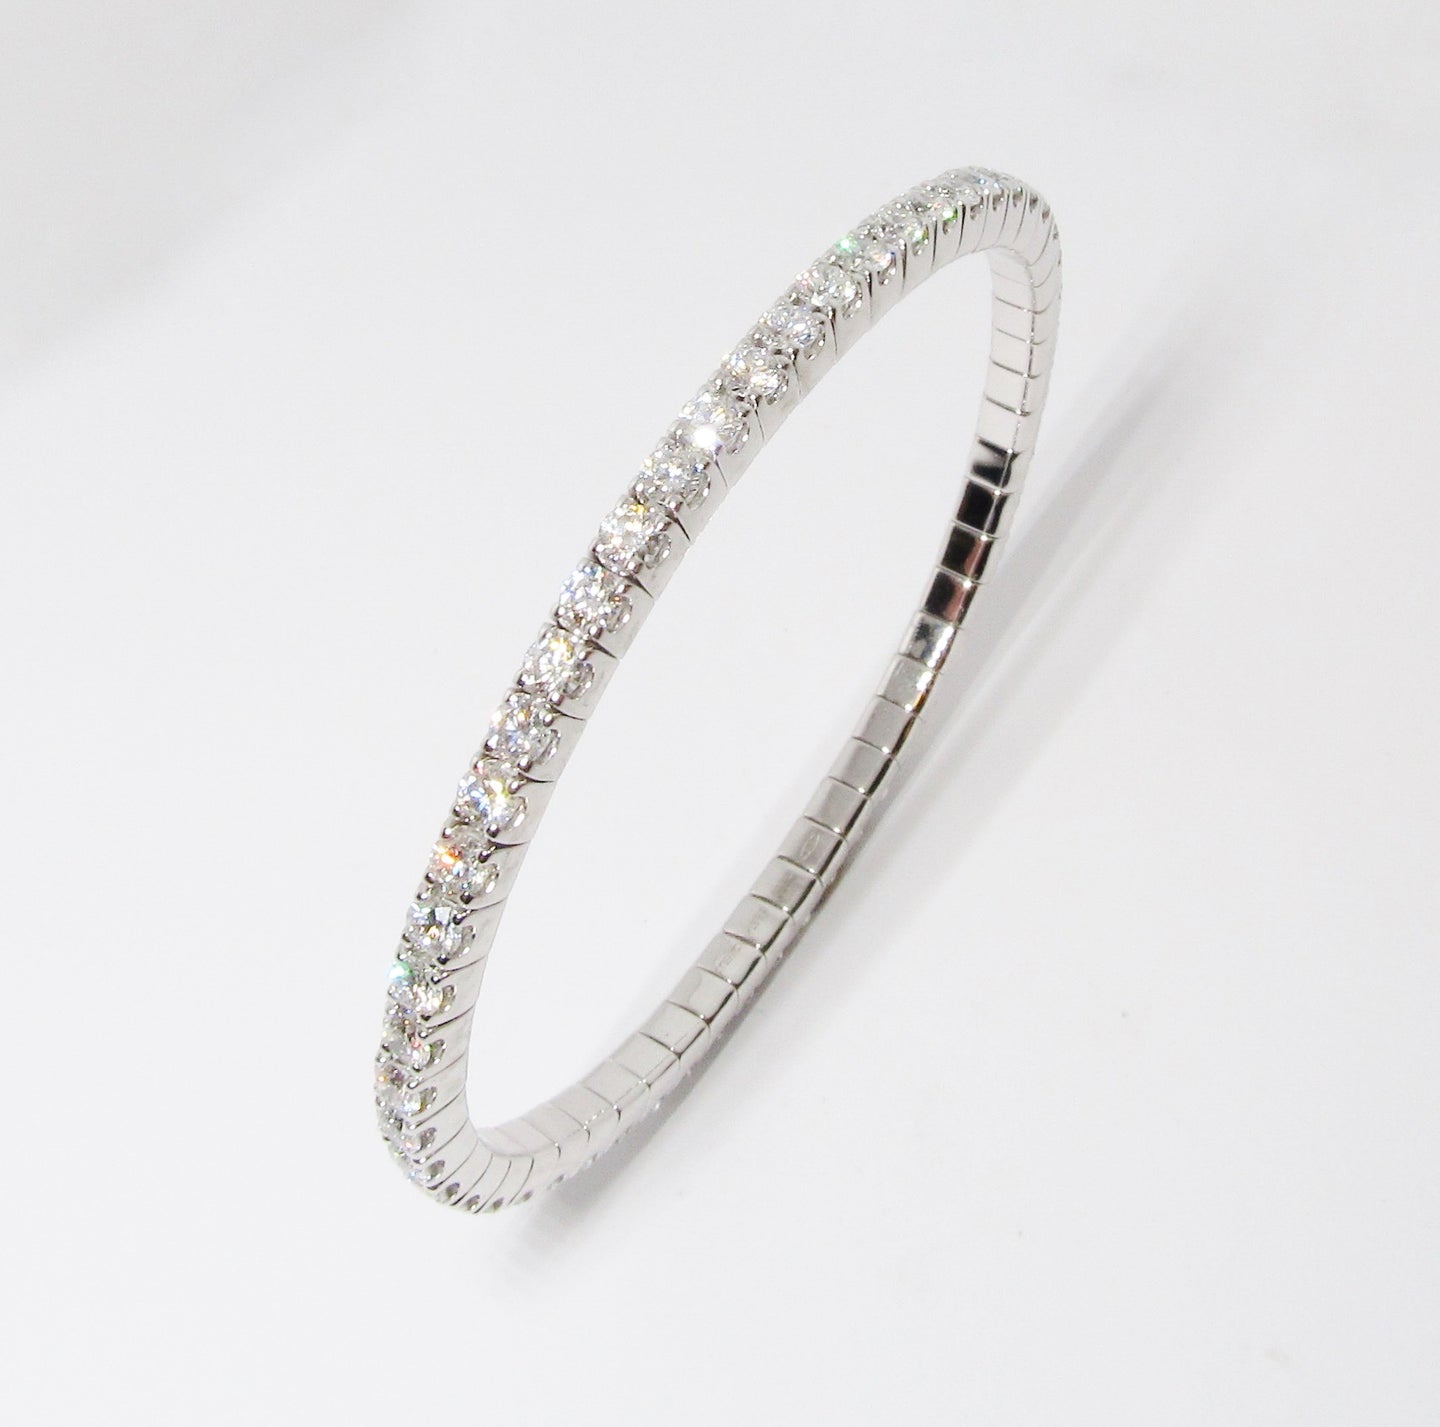 Diamond Stretch Bracelet/Bangle (Available in White Gold and Yellow Gold)